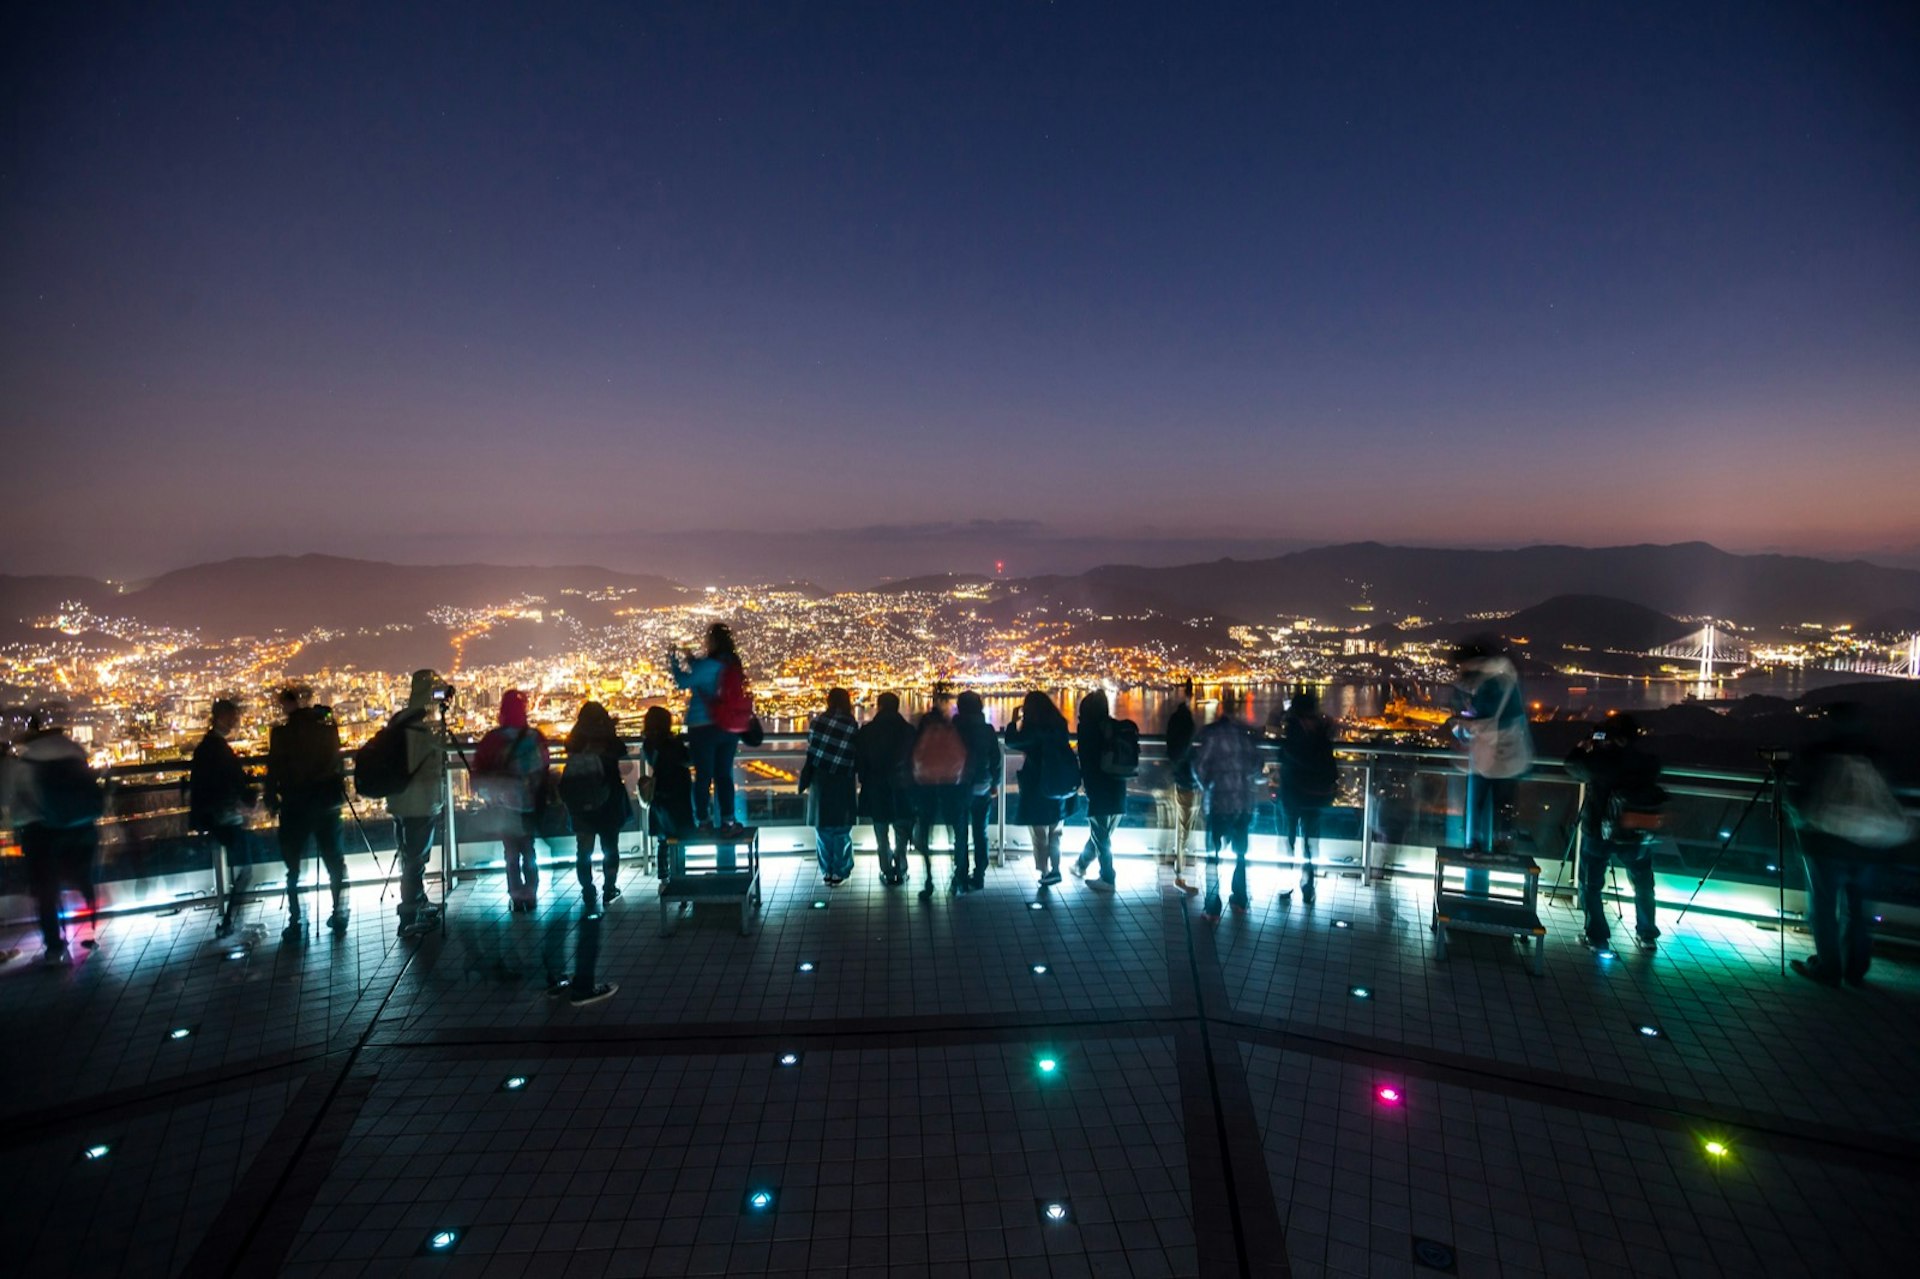 Tourists are silhouetted at night at an overlook, with the lights of Nagasaki below © Putt Sakdhnagool / Getty Images 